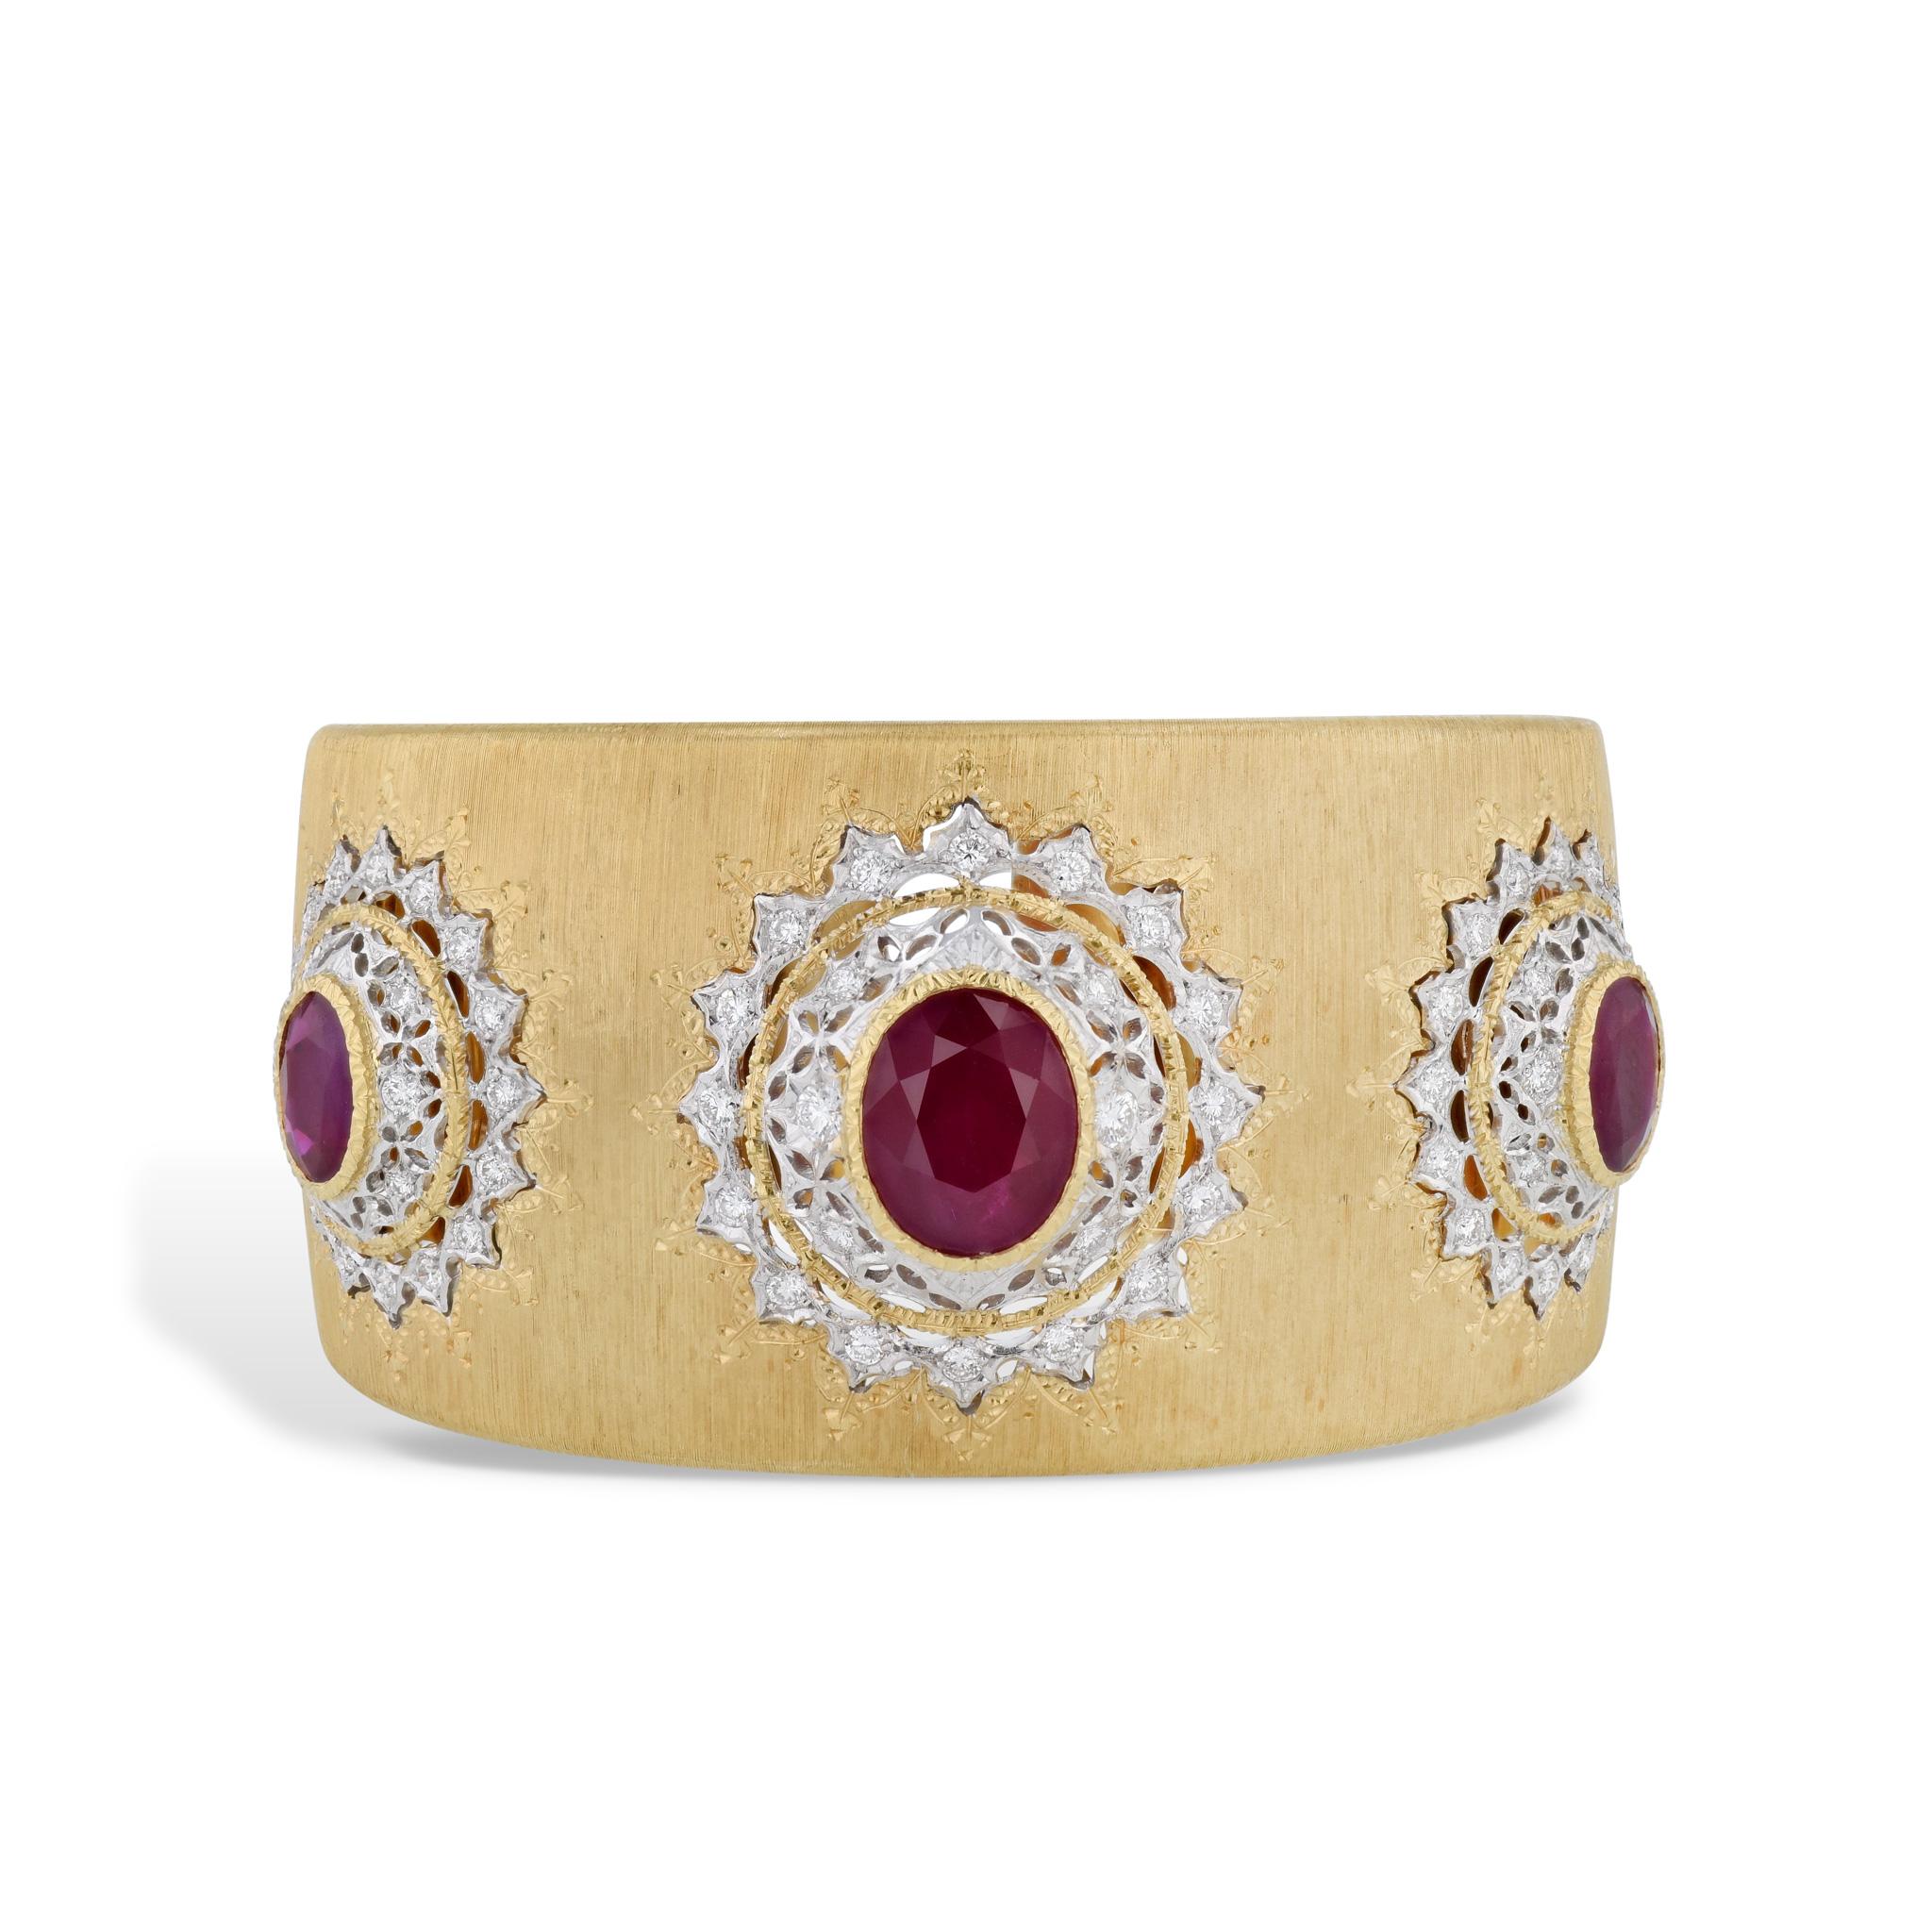 Buccellati 9.5 Carats Burmese Ruby Diamond Wide Cuff Bracelet GIA Certified  In Excellent Condition For Sale In Miami, FL